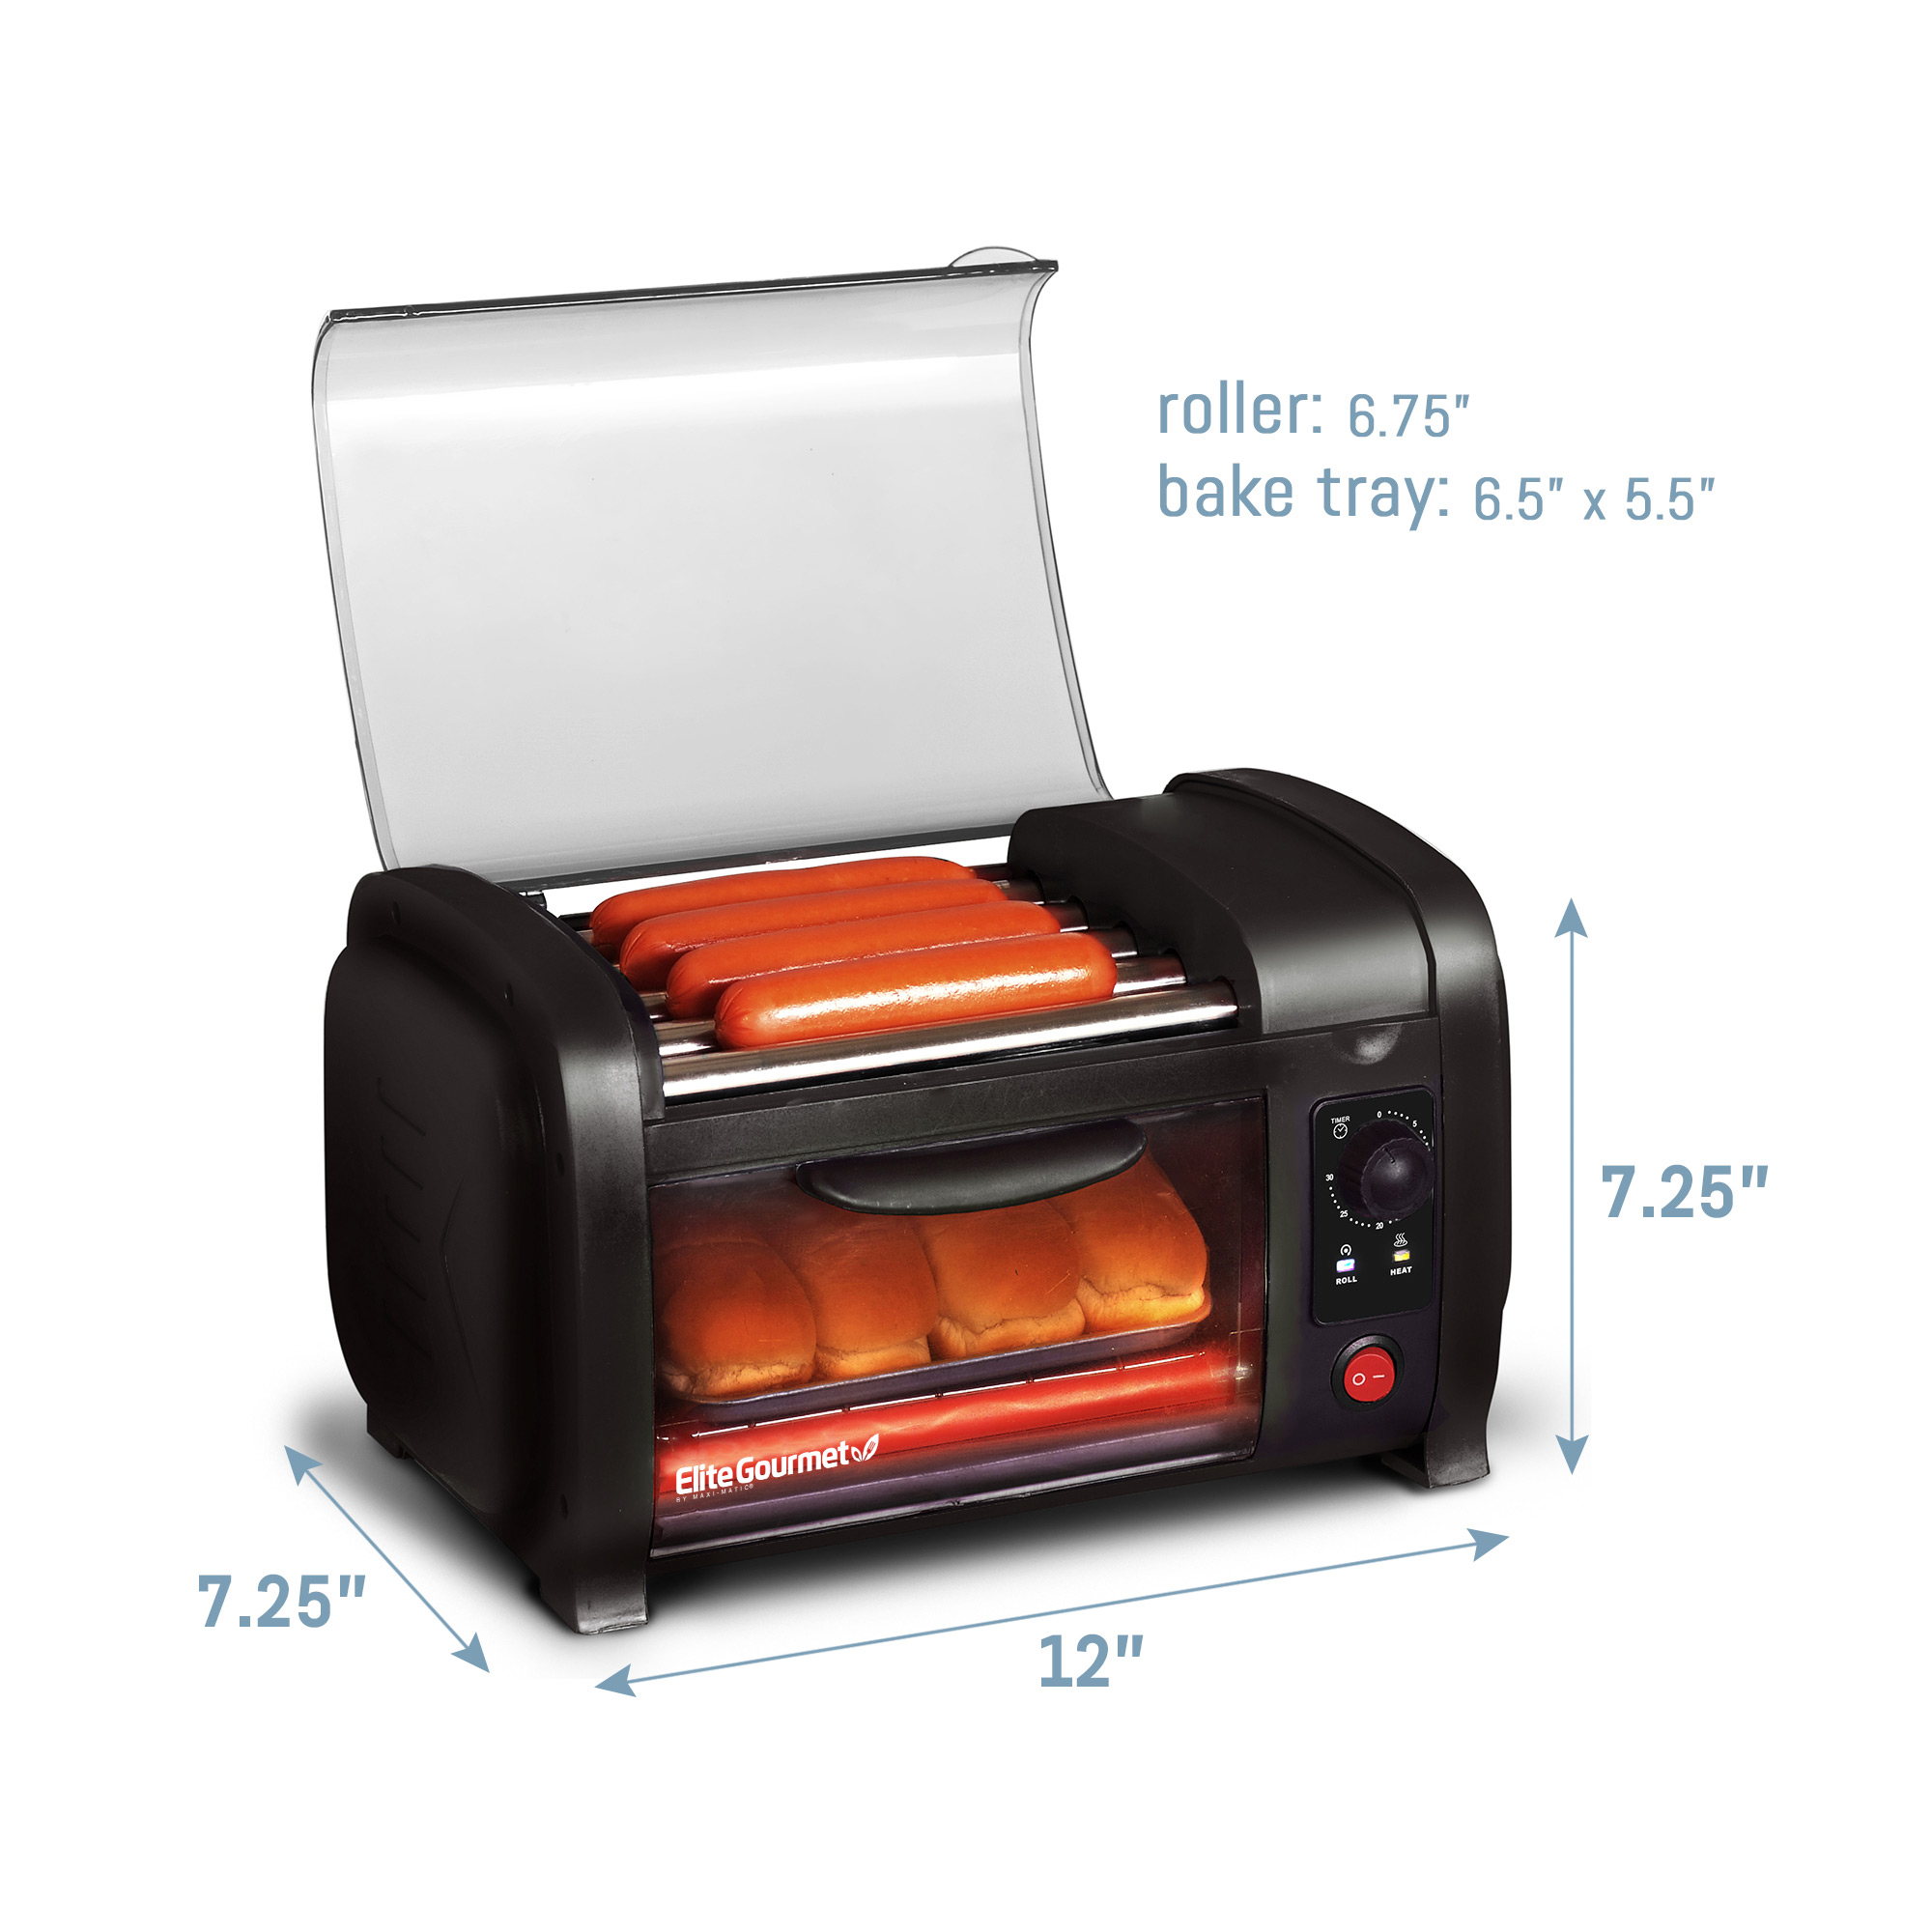 Elite Gourmet EHD-051B New Cuisine  Hot Dog Roller and Toaster Oven, Black - image 3 of 6